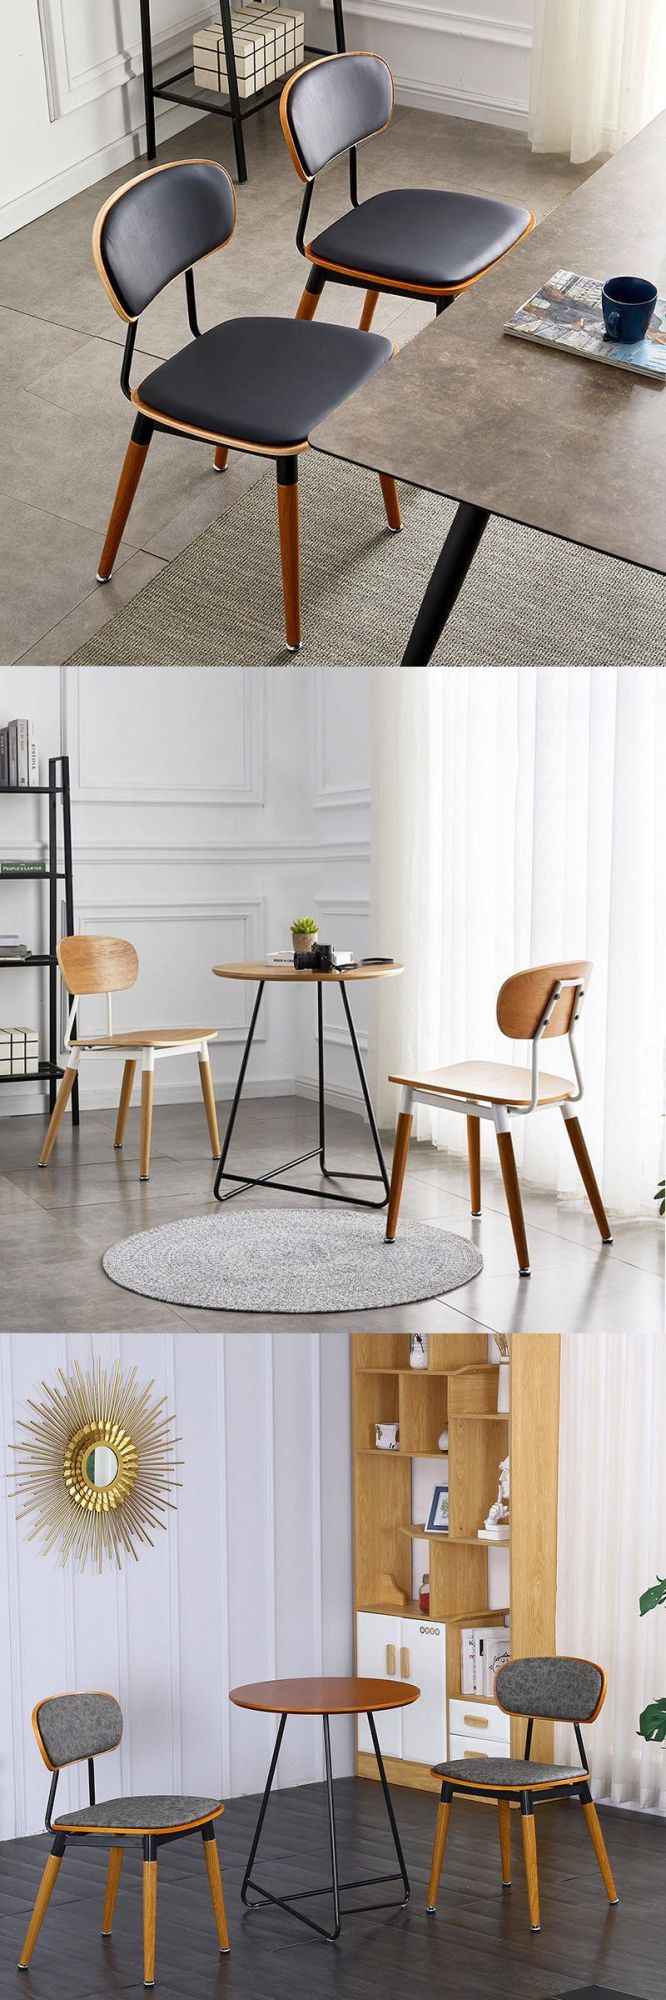 High Quality Home Restaurant Cafe Furniture Metal Frame Leather Seat Wooden Dining Chair for Cafe Shop